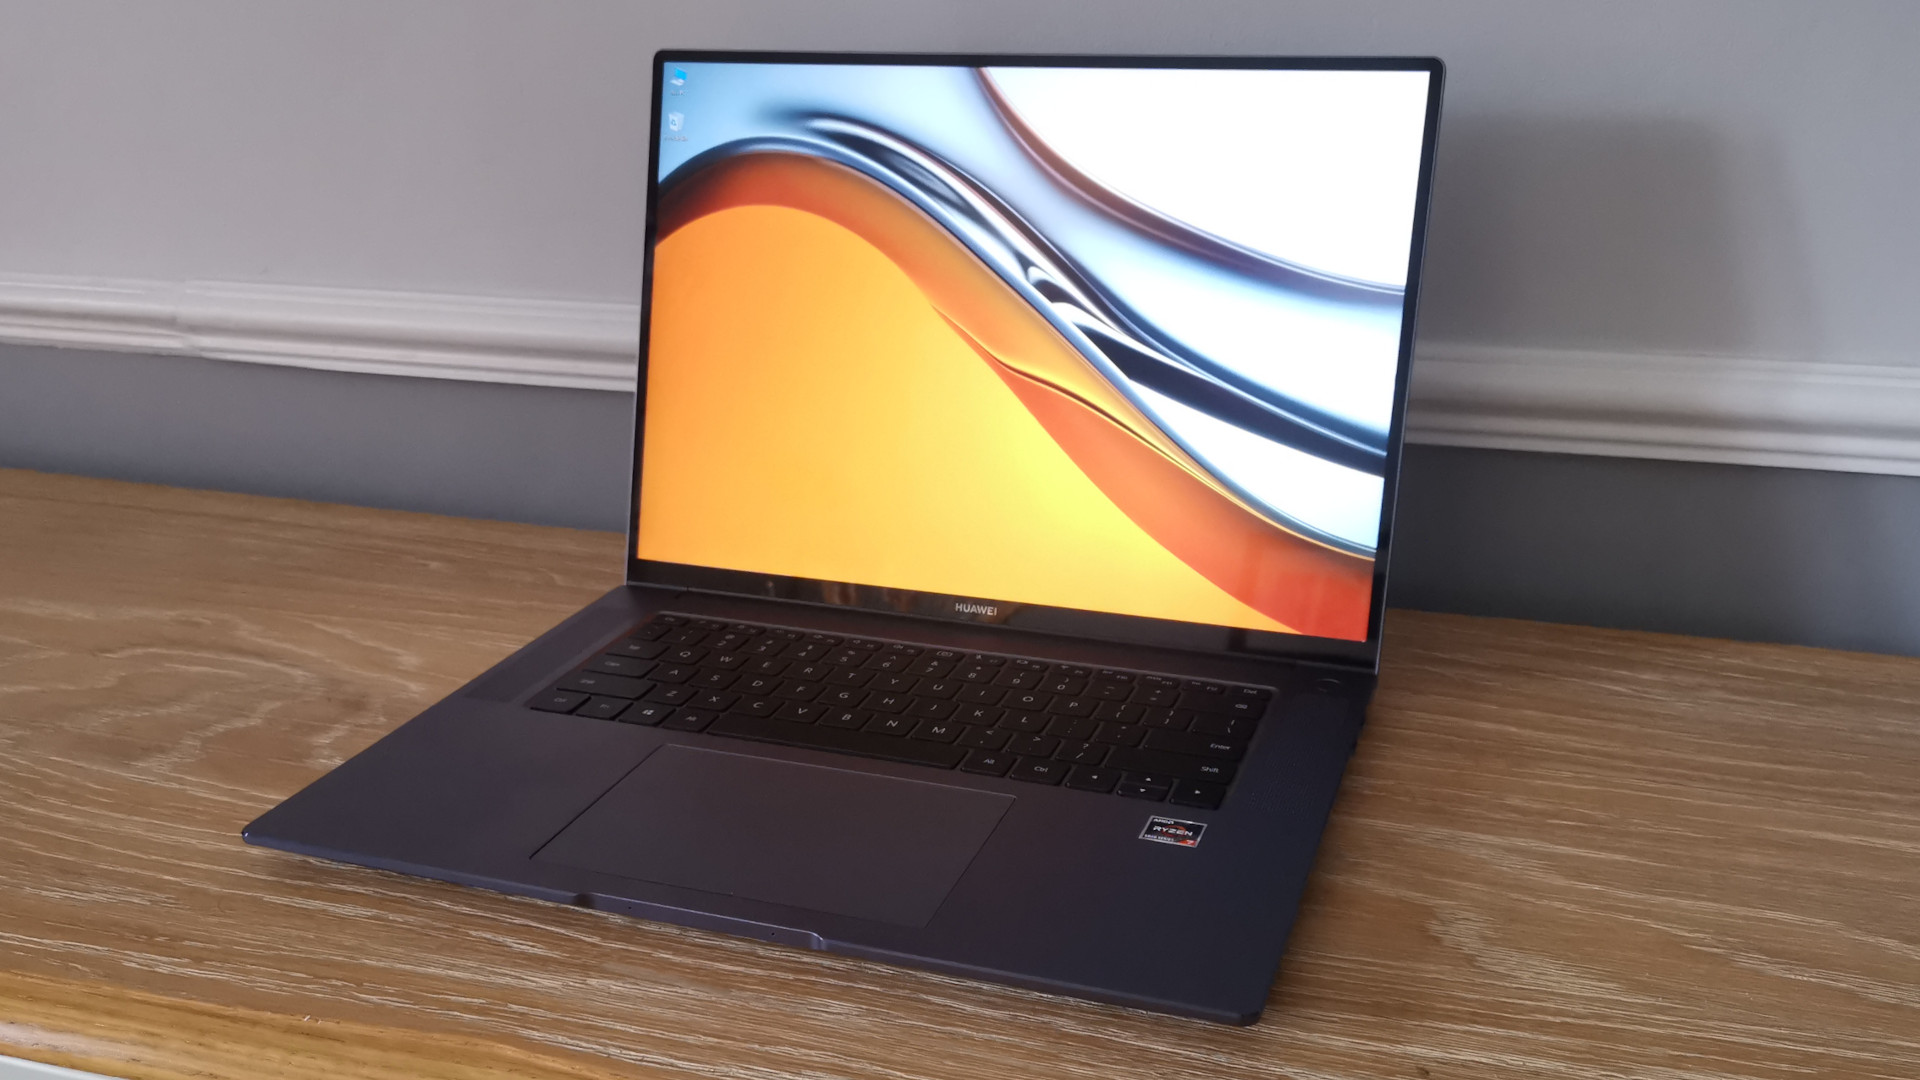 Huawei MateBook 16 review: A great laptop, minus the webcam